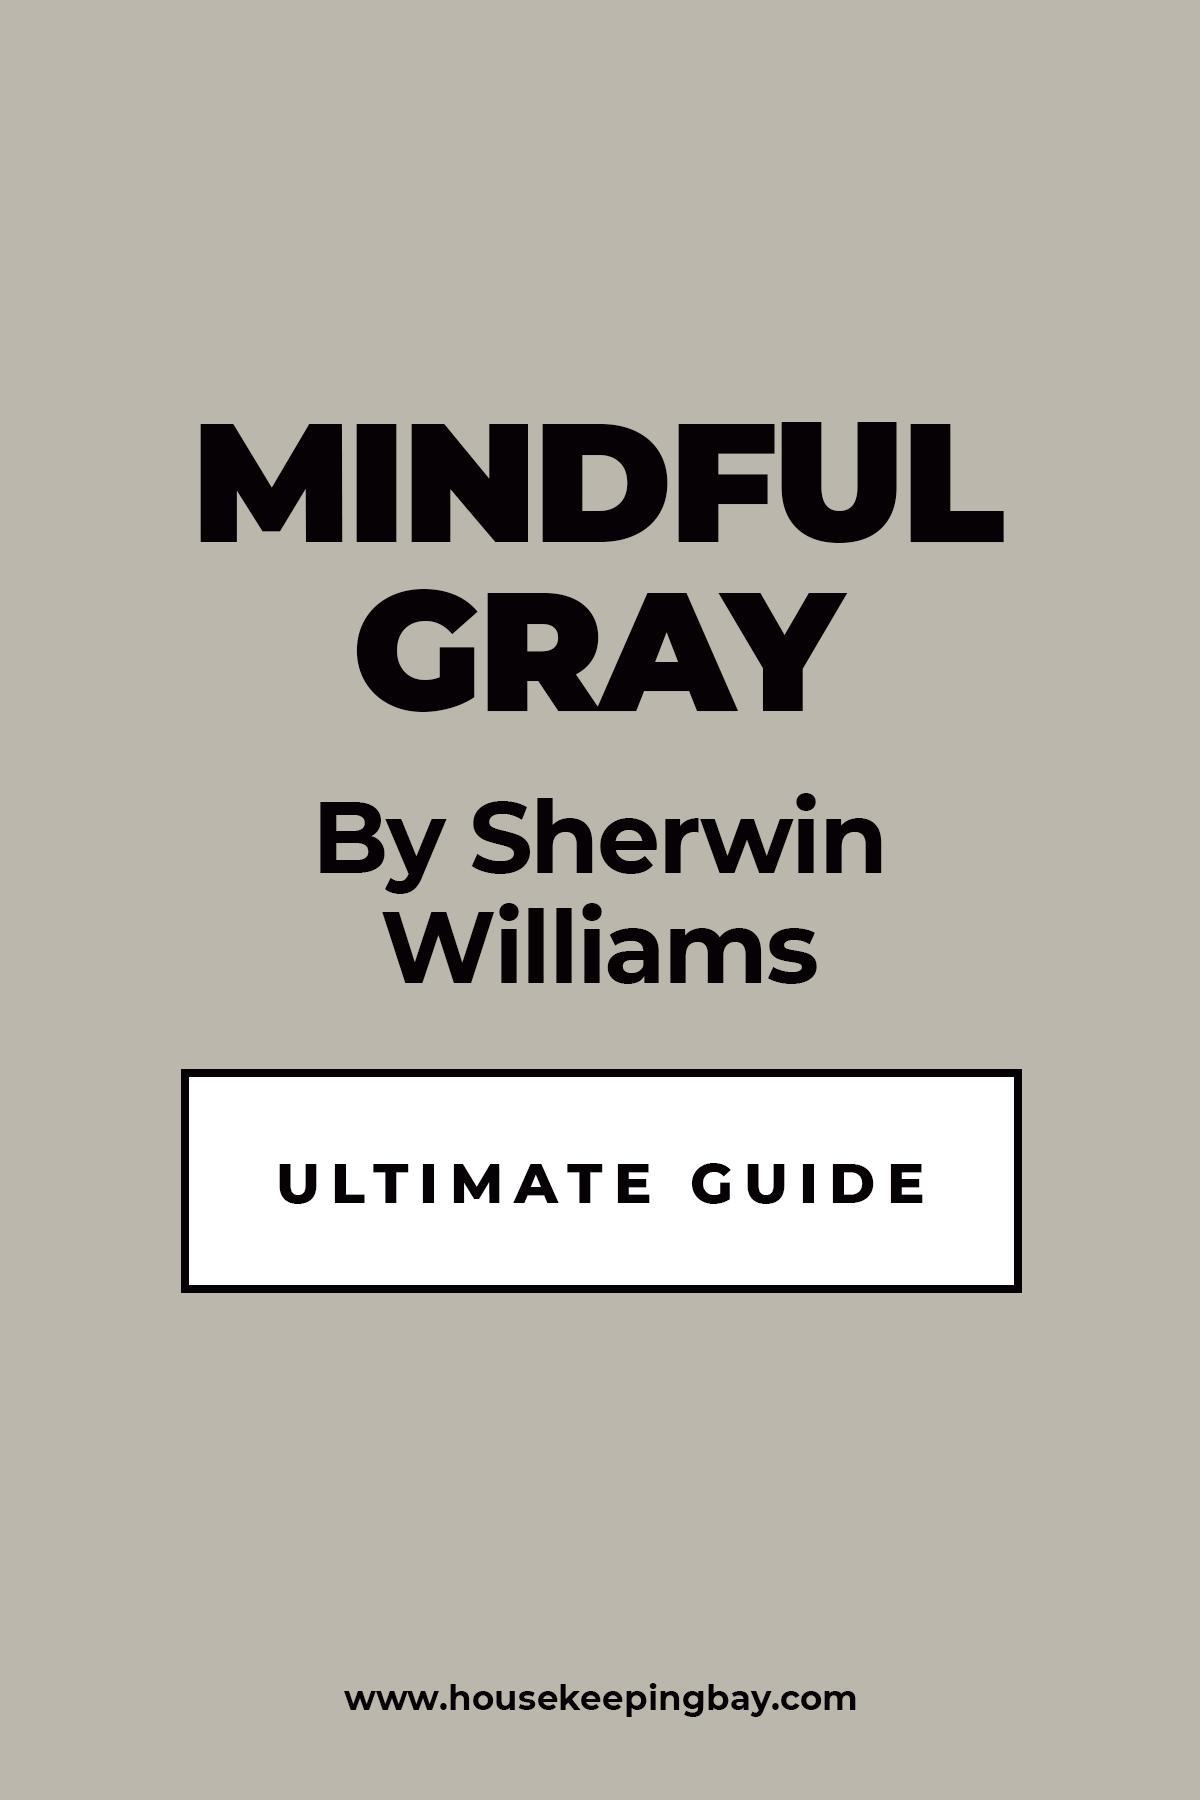 Mindful Gray By Sherwin Williams Ultimate Guide (1)